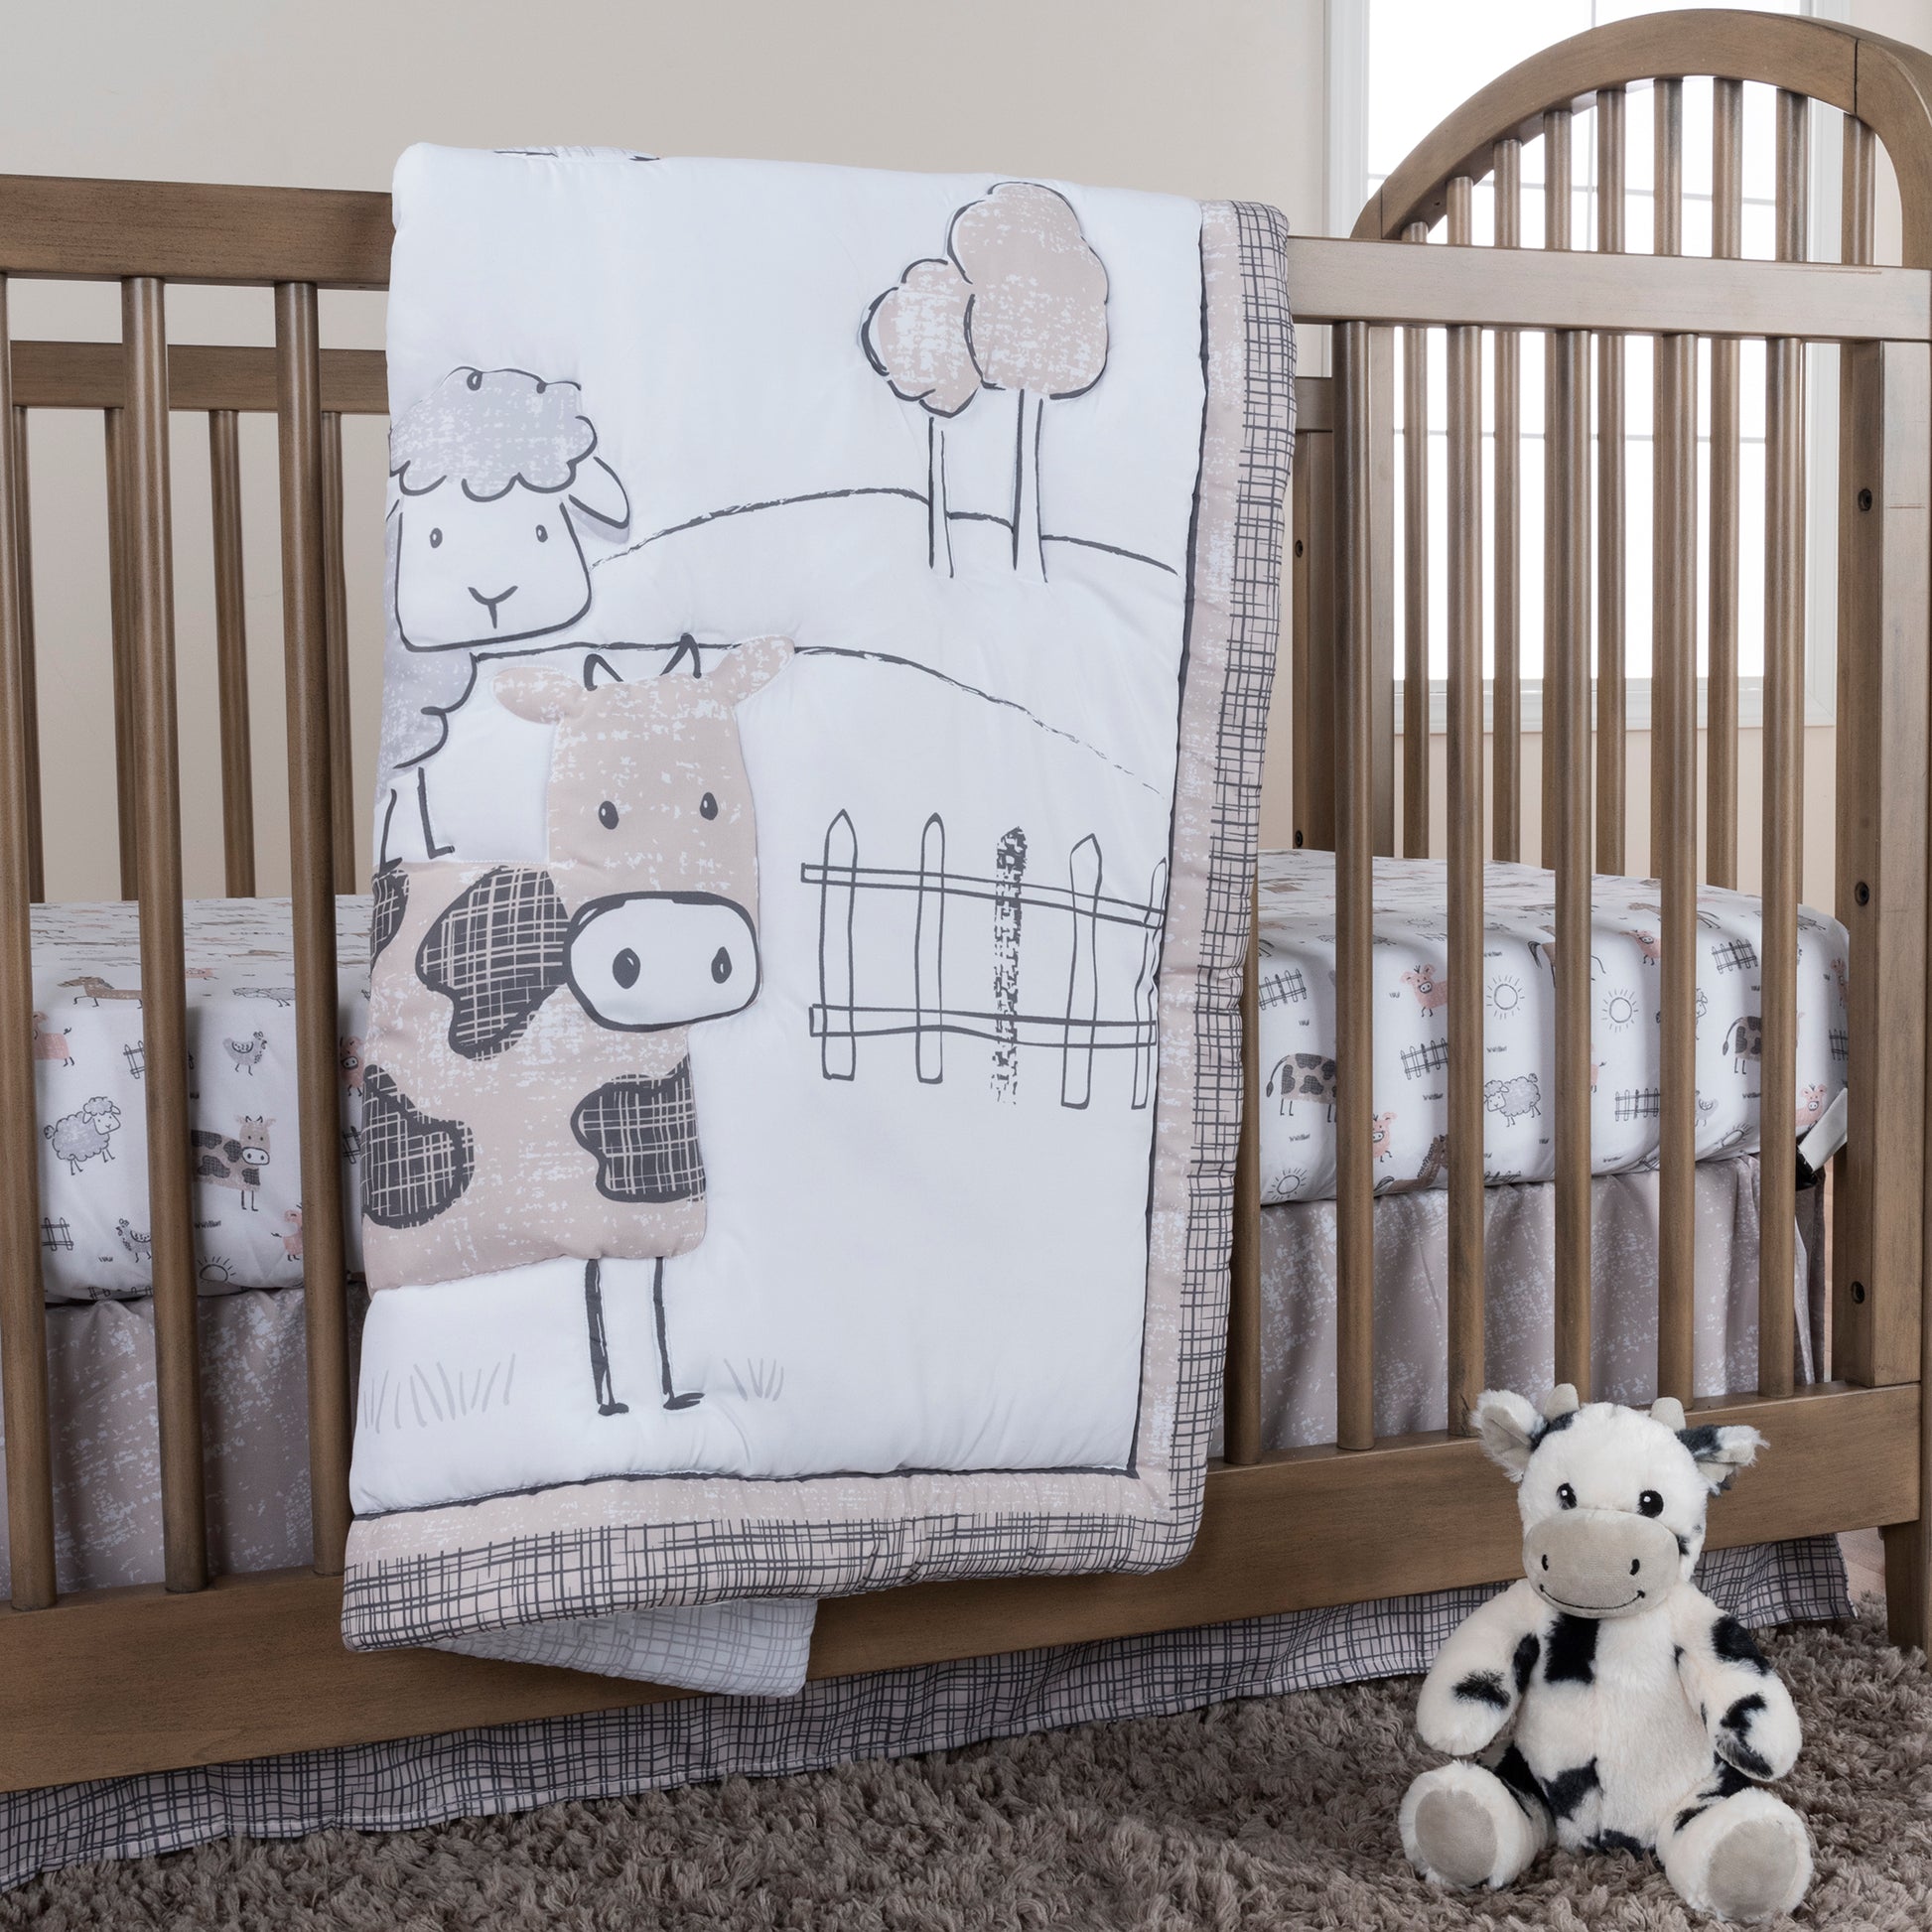  Cottage Farm 4 Piece Crib Bedding Set main image in stylized room; Bedding set features a cow, sheep, pig, and chicken out playing in a simple pasture. Grays, browns and a rosy pink color scheme will add the perfect last touch to your little farmer's nur